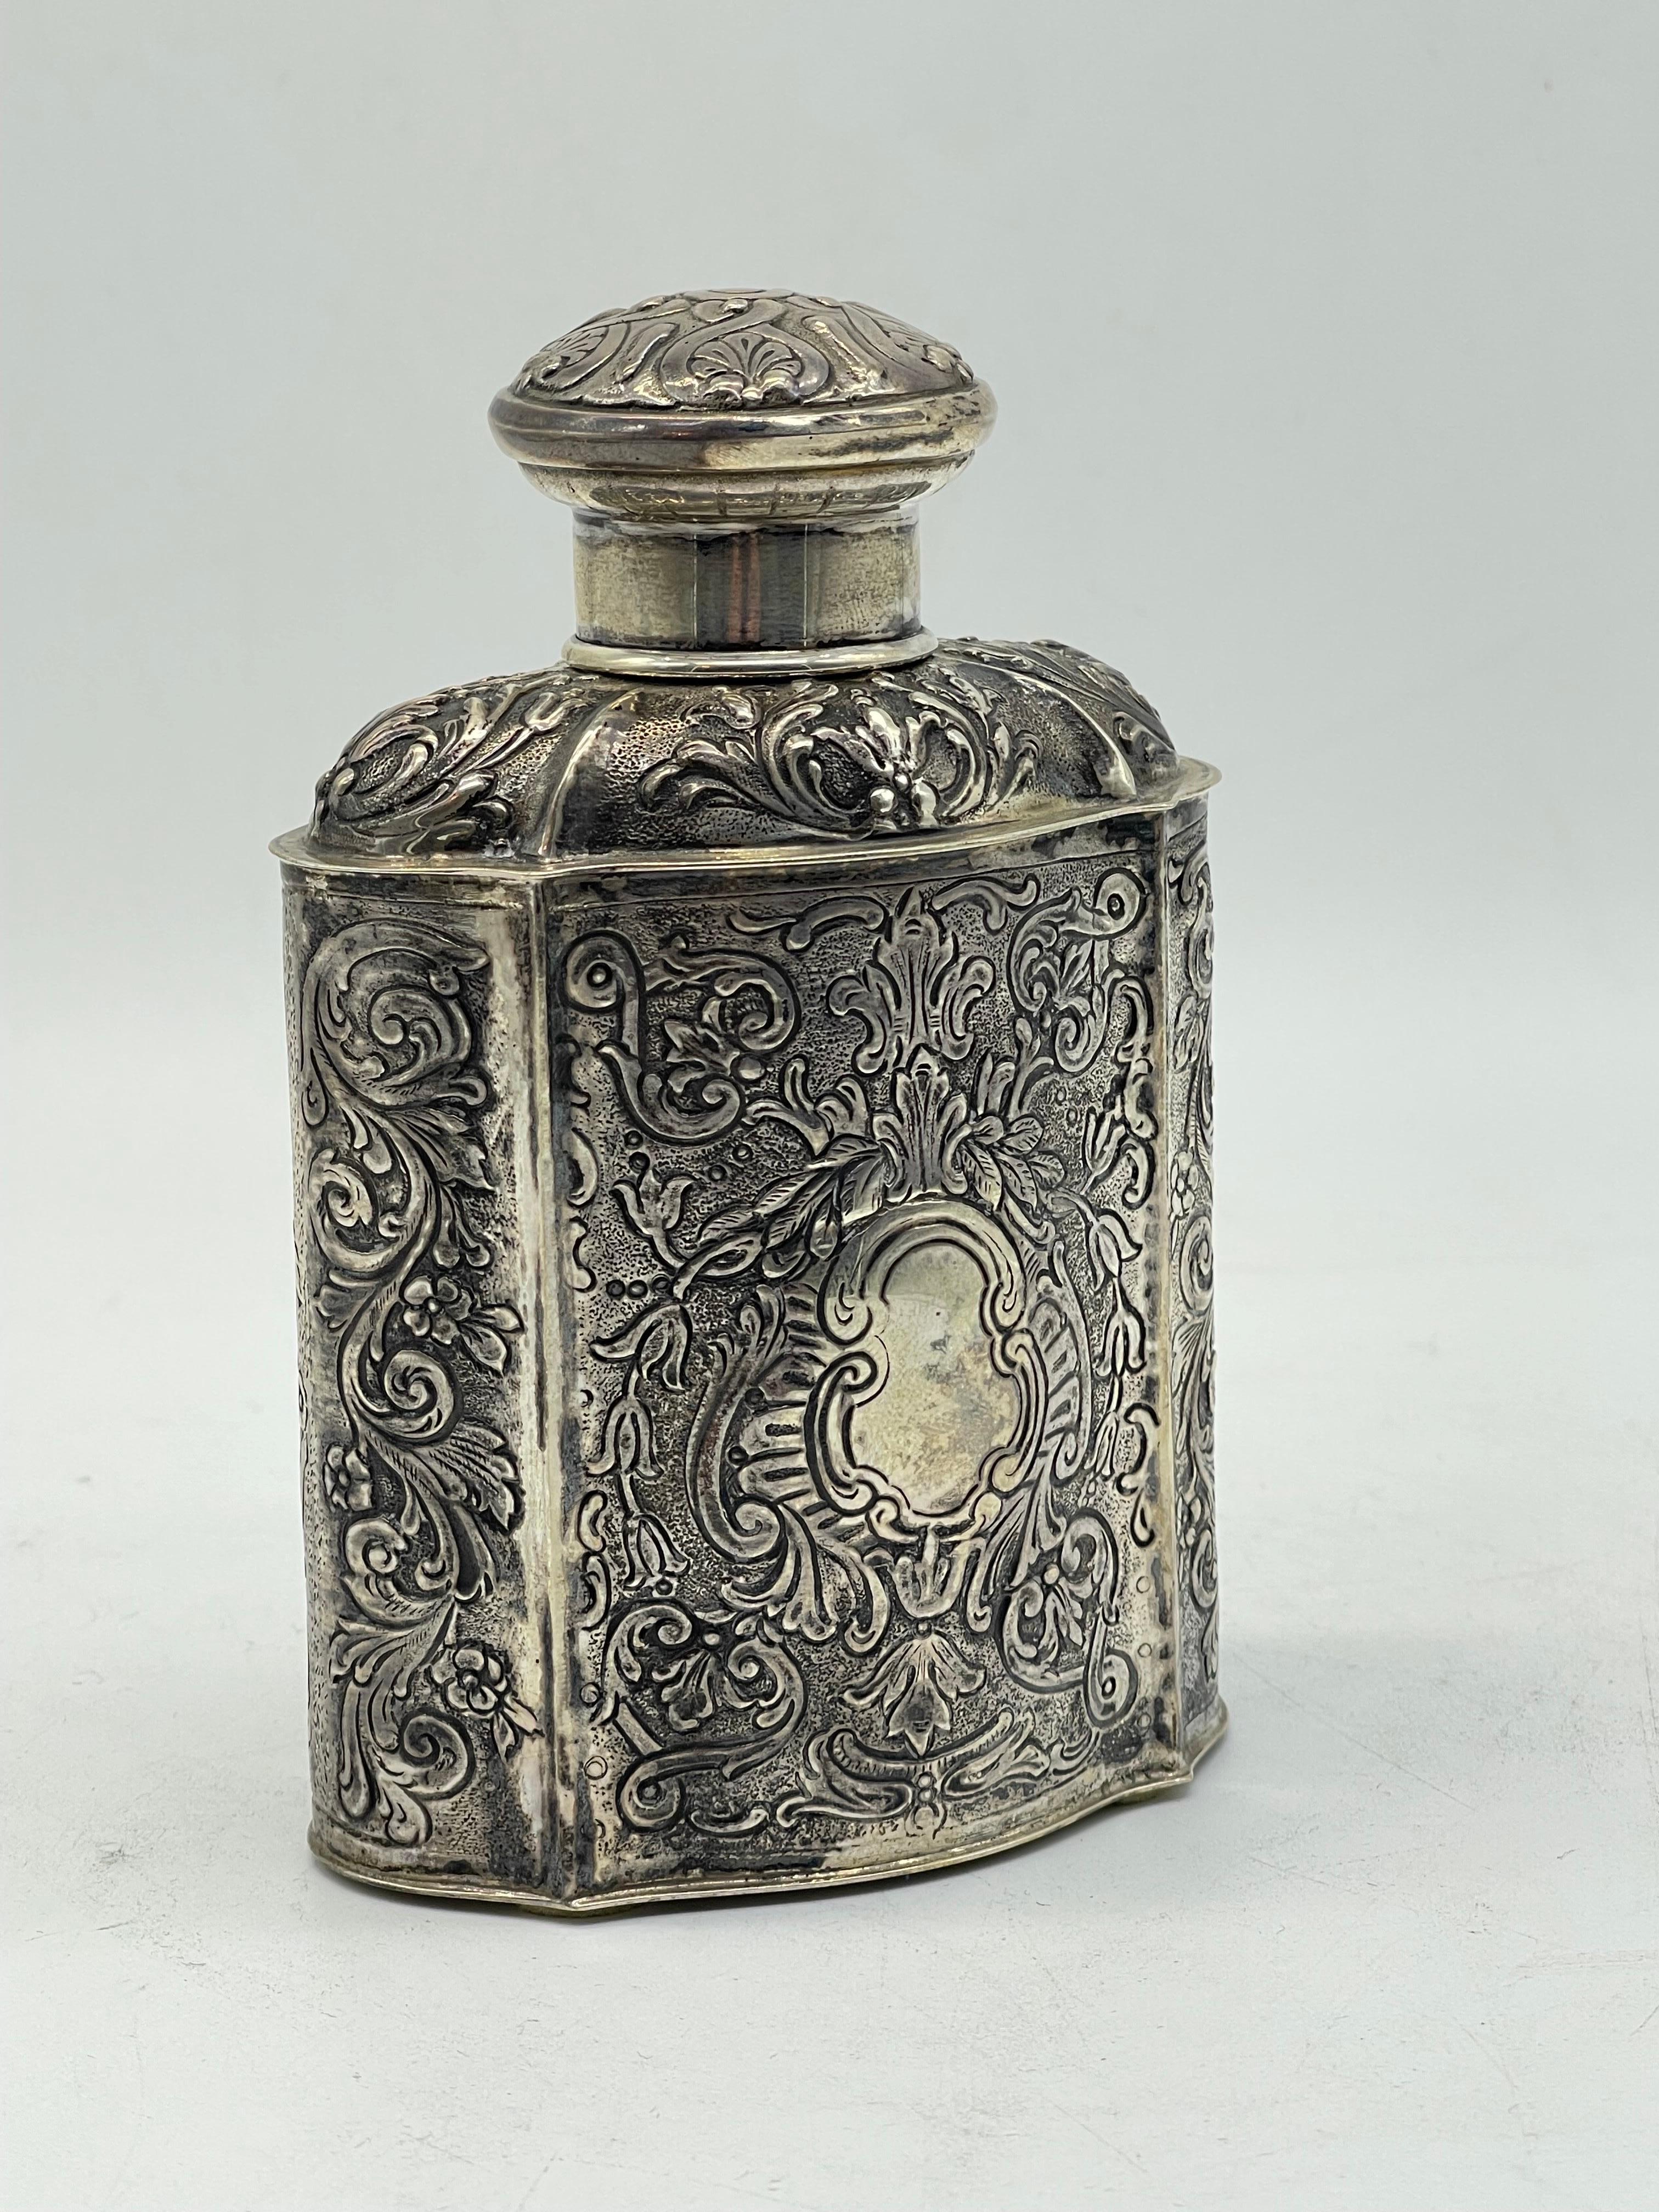 Antique 835 Silver Tea Caddy - lidded Box 

Christoph Widmann Germany handmade
Half moon & crown
 
Weight: 229 grams

The condition can be seen in the pictures.